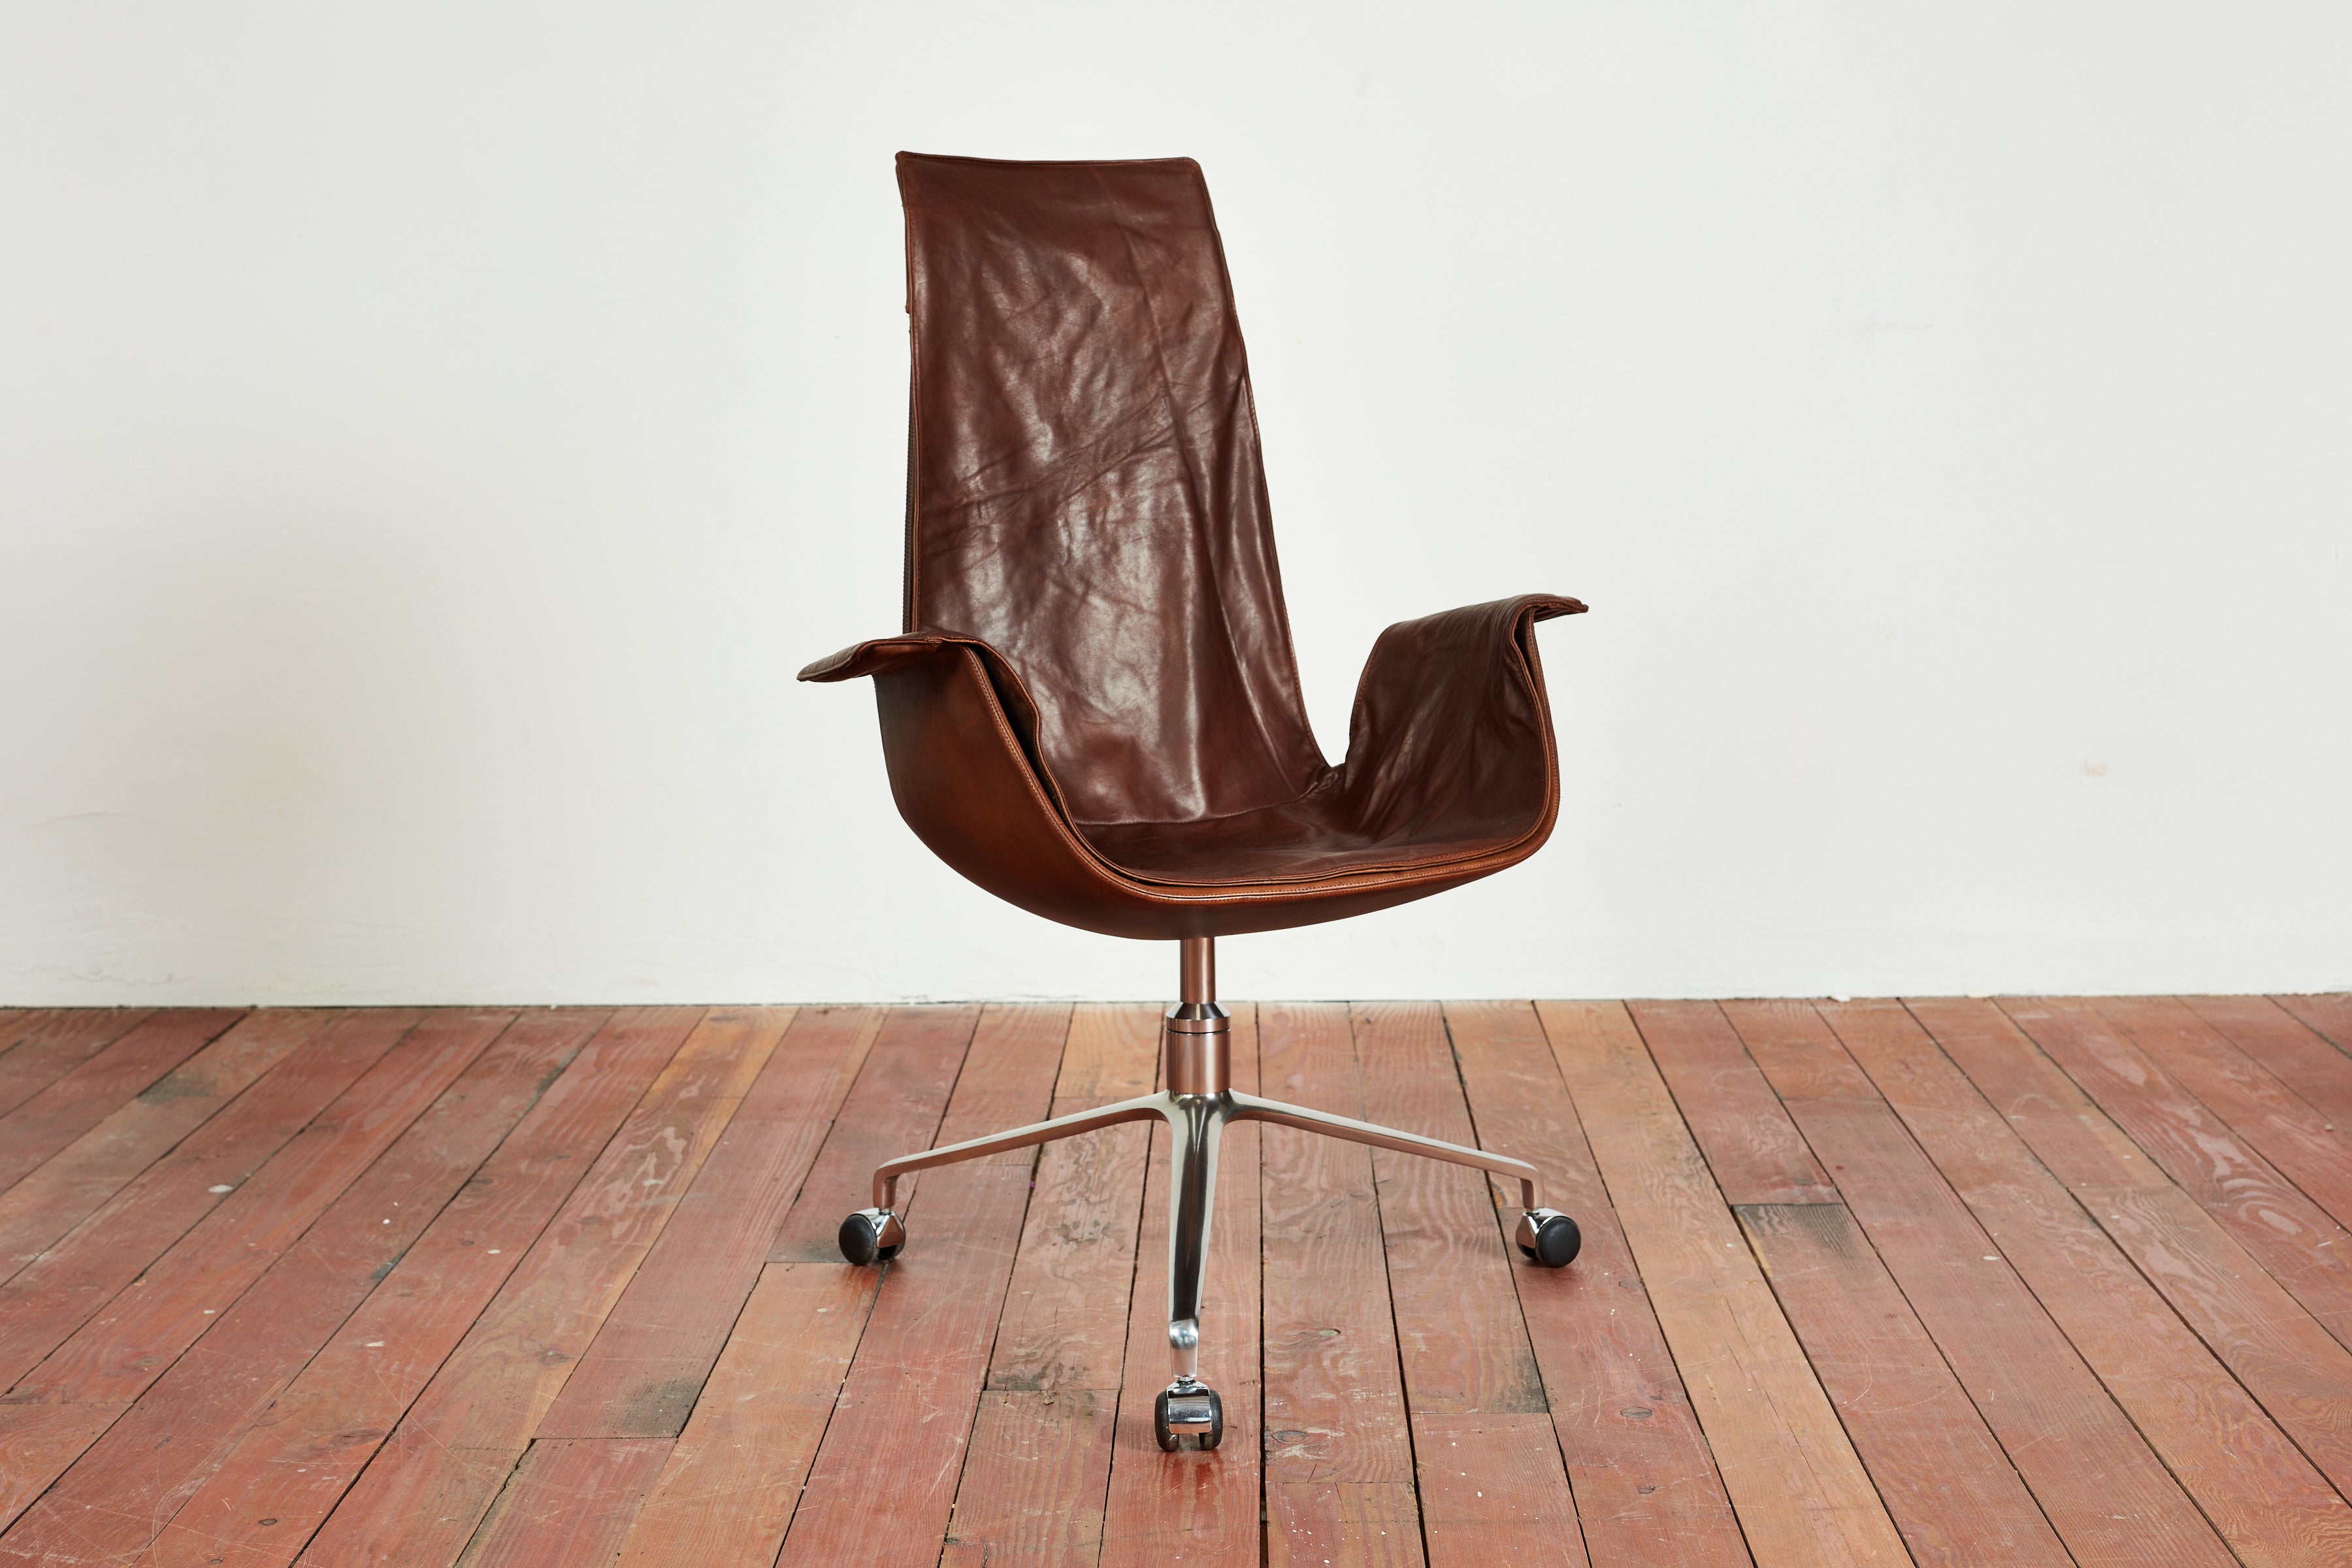 Classic Bird Chair by Jorgen Kastholm and Preben Fabricius with 3 leg rolling base and casters.
Carmel brown leather maintains wonderful patina. 
Swivels and rolls well on original casters.
